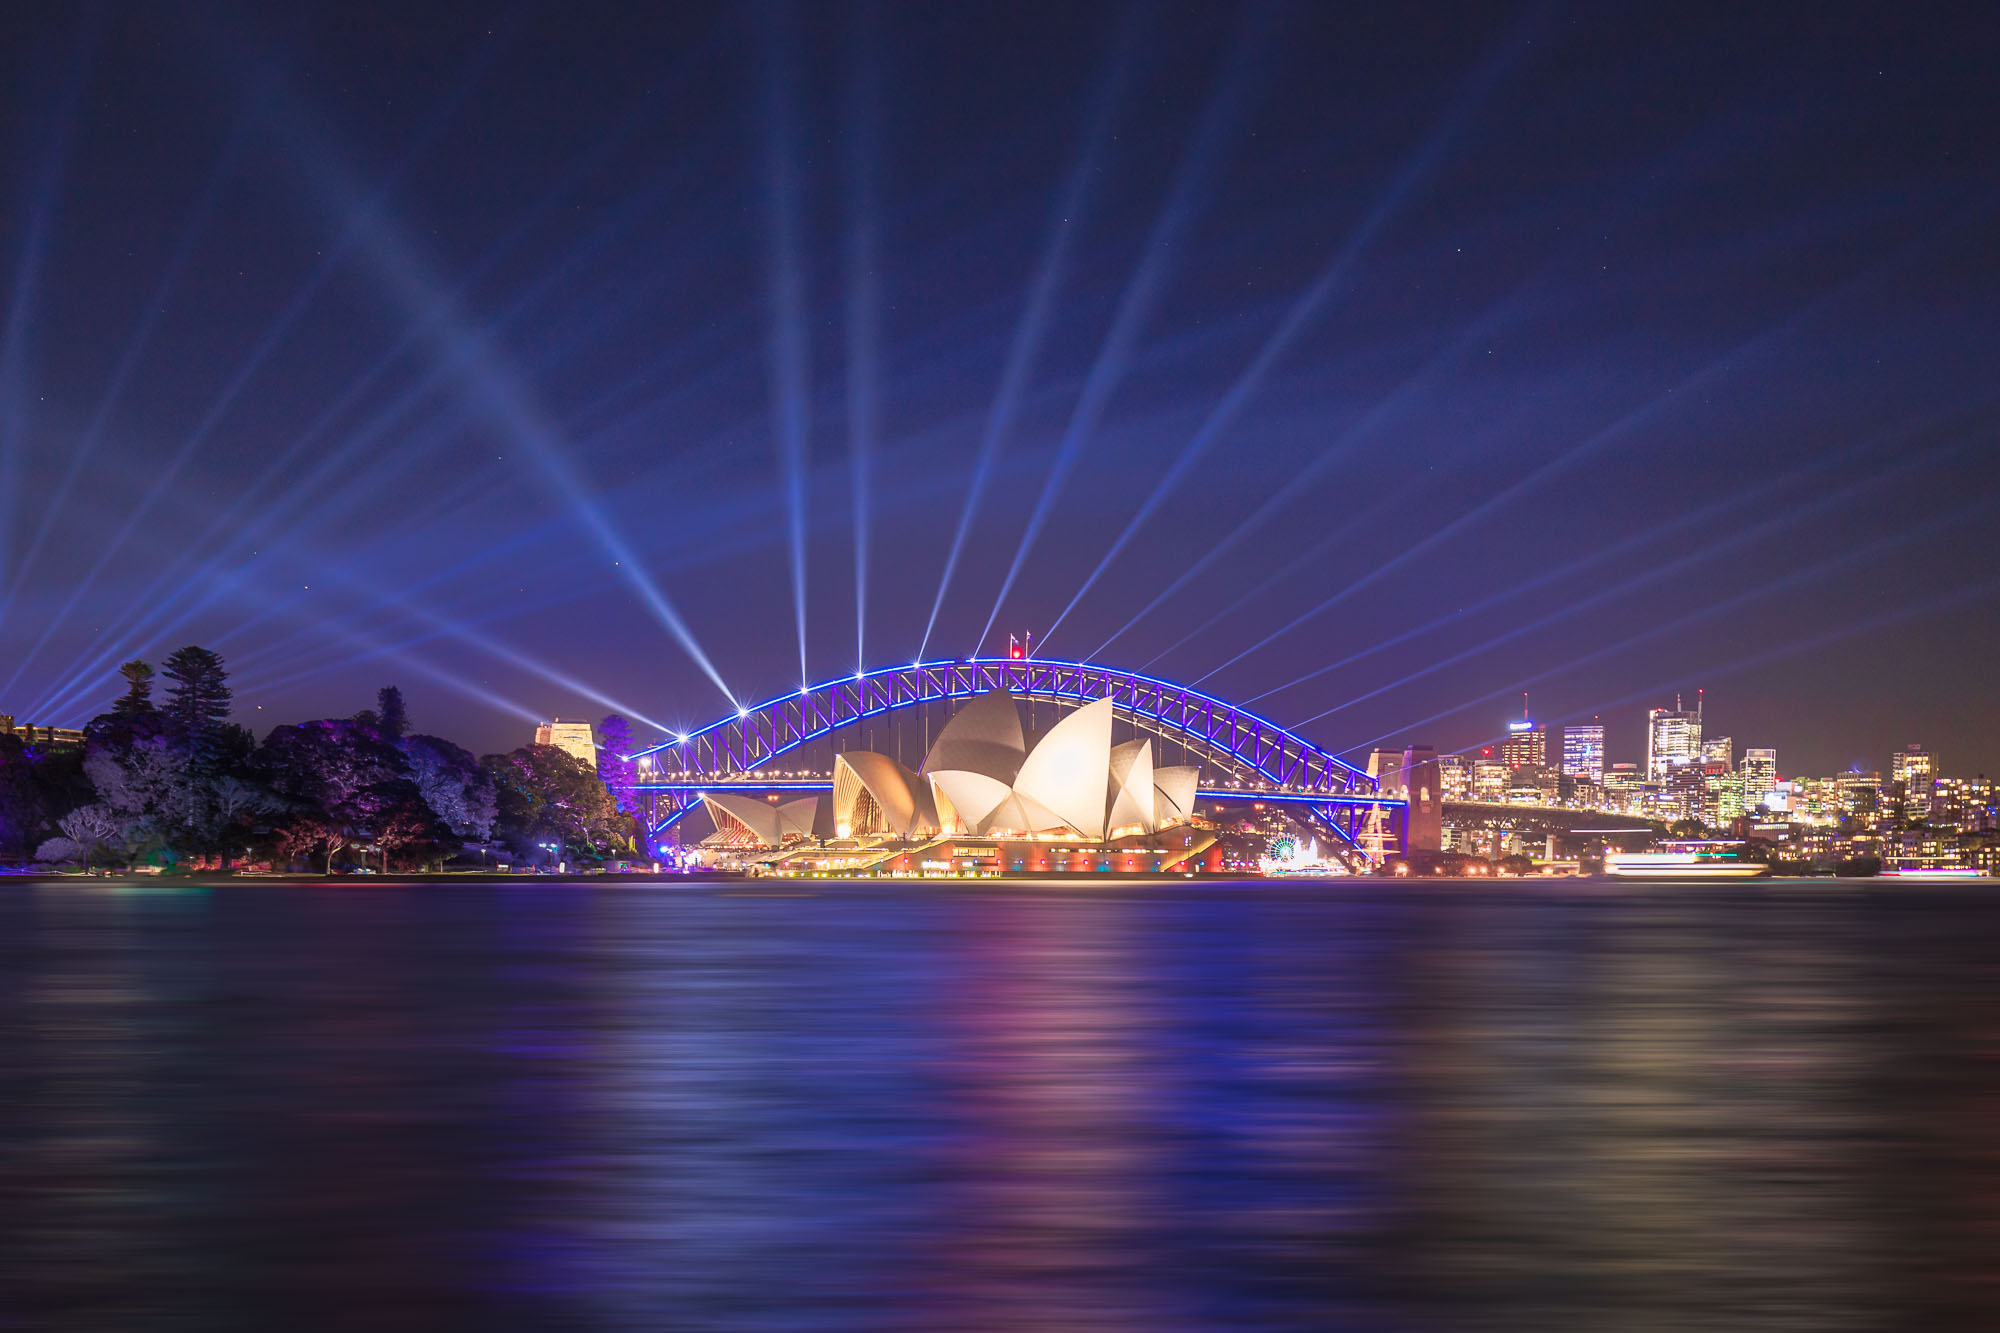 Night view of The Opera House during the Sydney Vivid festival of light